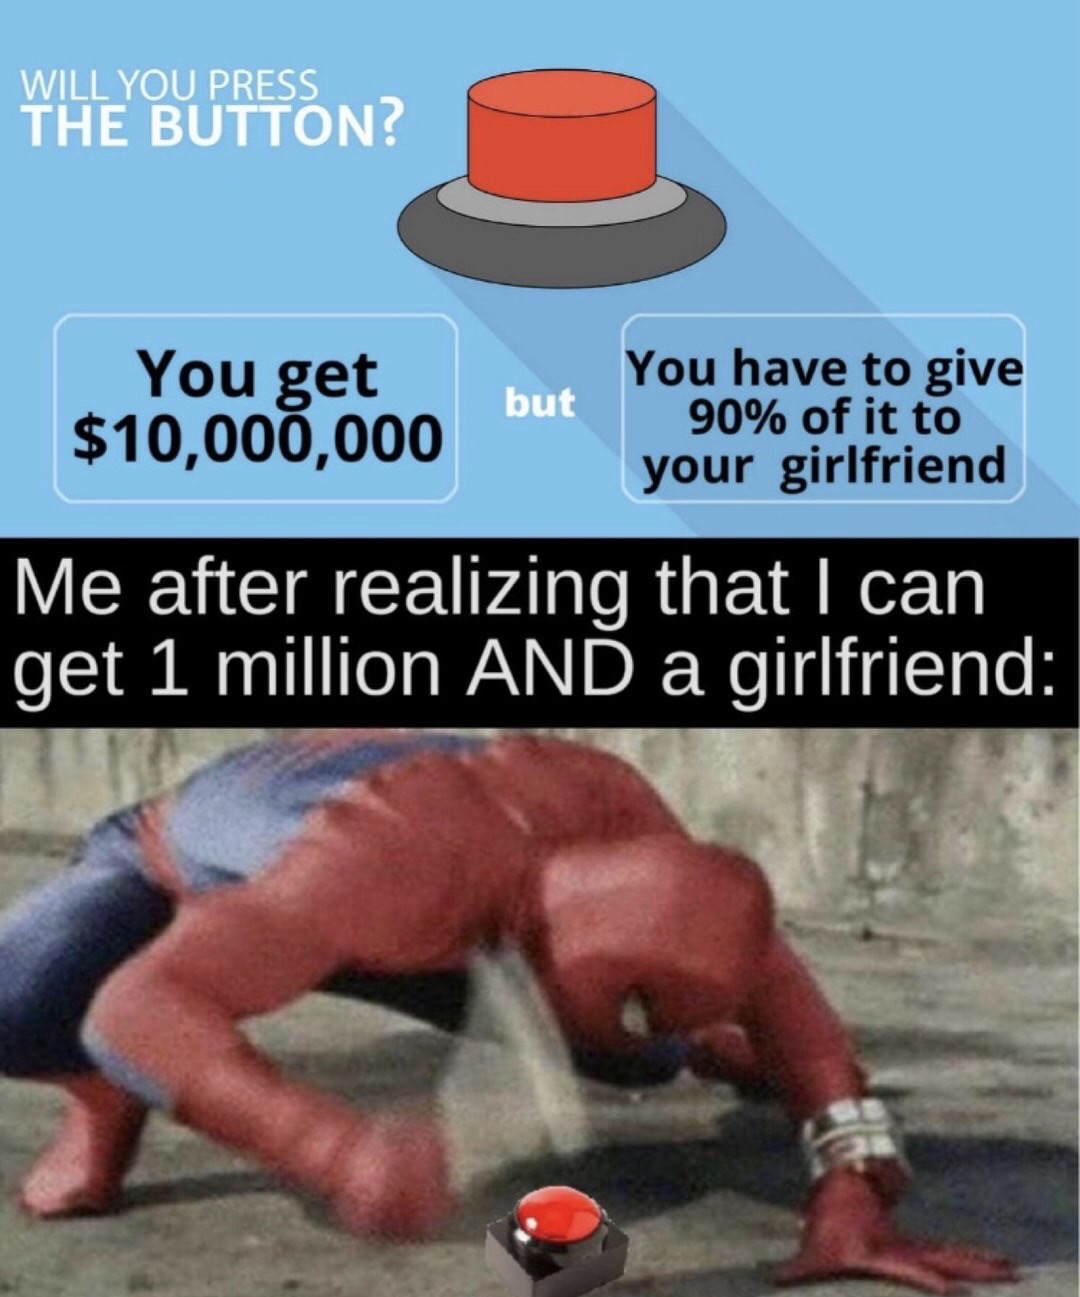 spiderman hammer meme template - Will You Press The Button? You get $10,000,000 but You have to give 90% of it to your girlfriend Me after realizing that I can get 1 million And a girlfriend